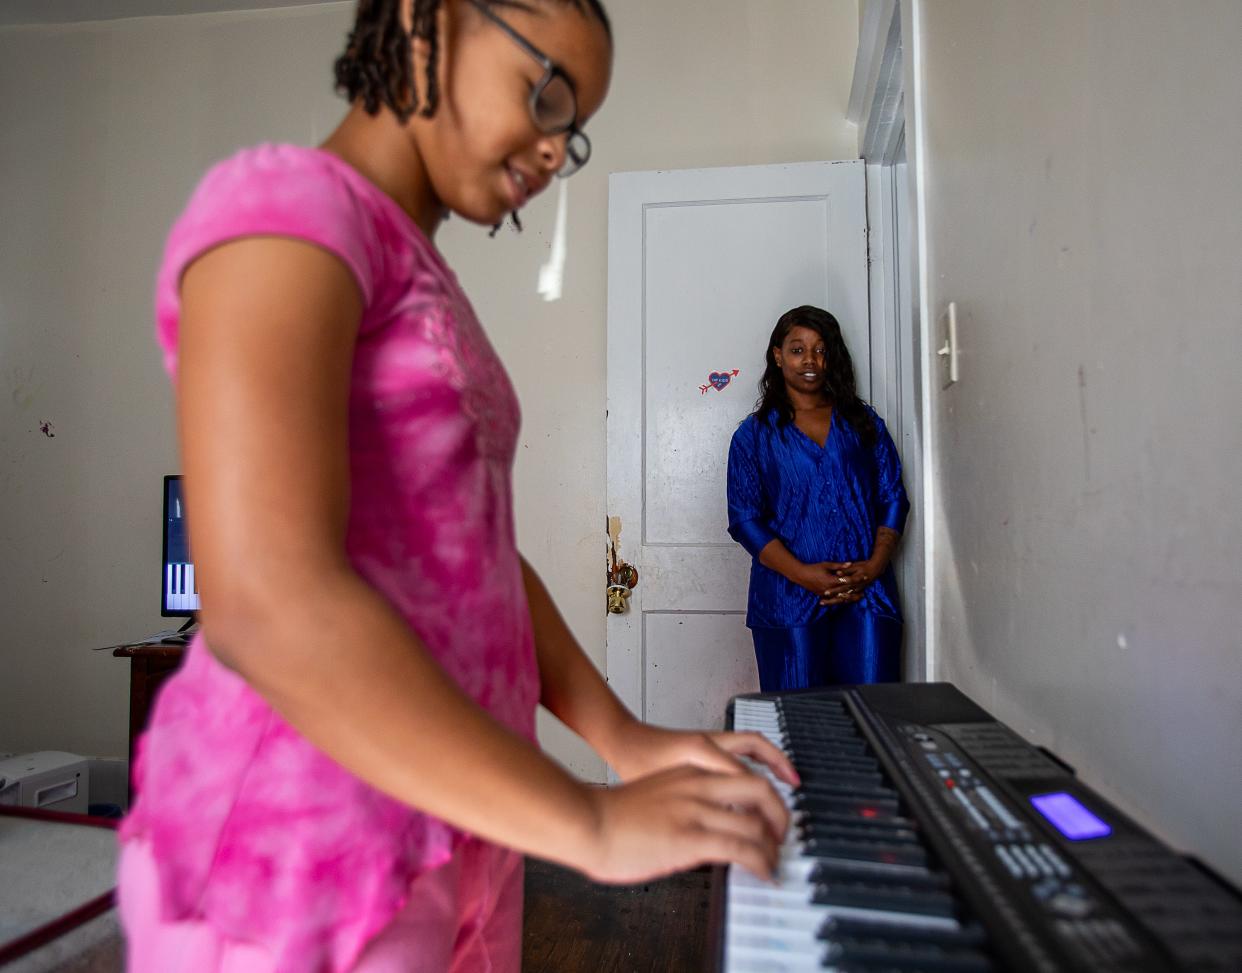 Kwmisha Adams, right, watches as her 10-year-old daughter Devaeh Snellen plays piano at their residence on Lindell Avenue in Louisville's Shawnee neighborhood. The house was built in the 1920s and has tested positive for lead paint in several areas in the home. Oct. 11, 2023